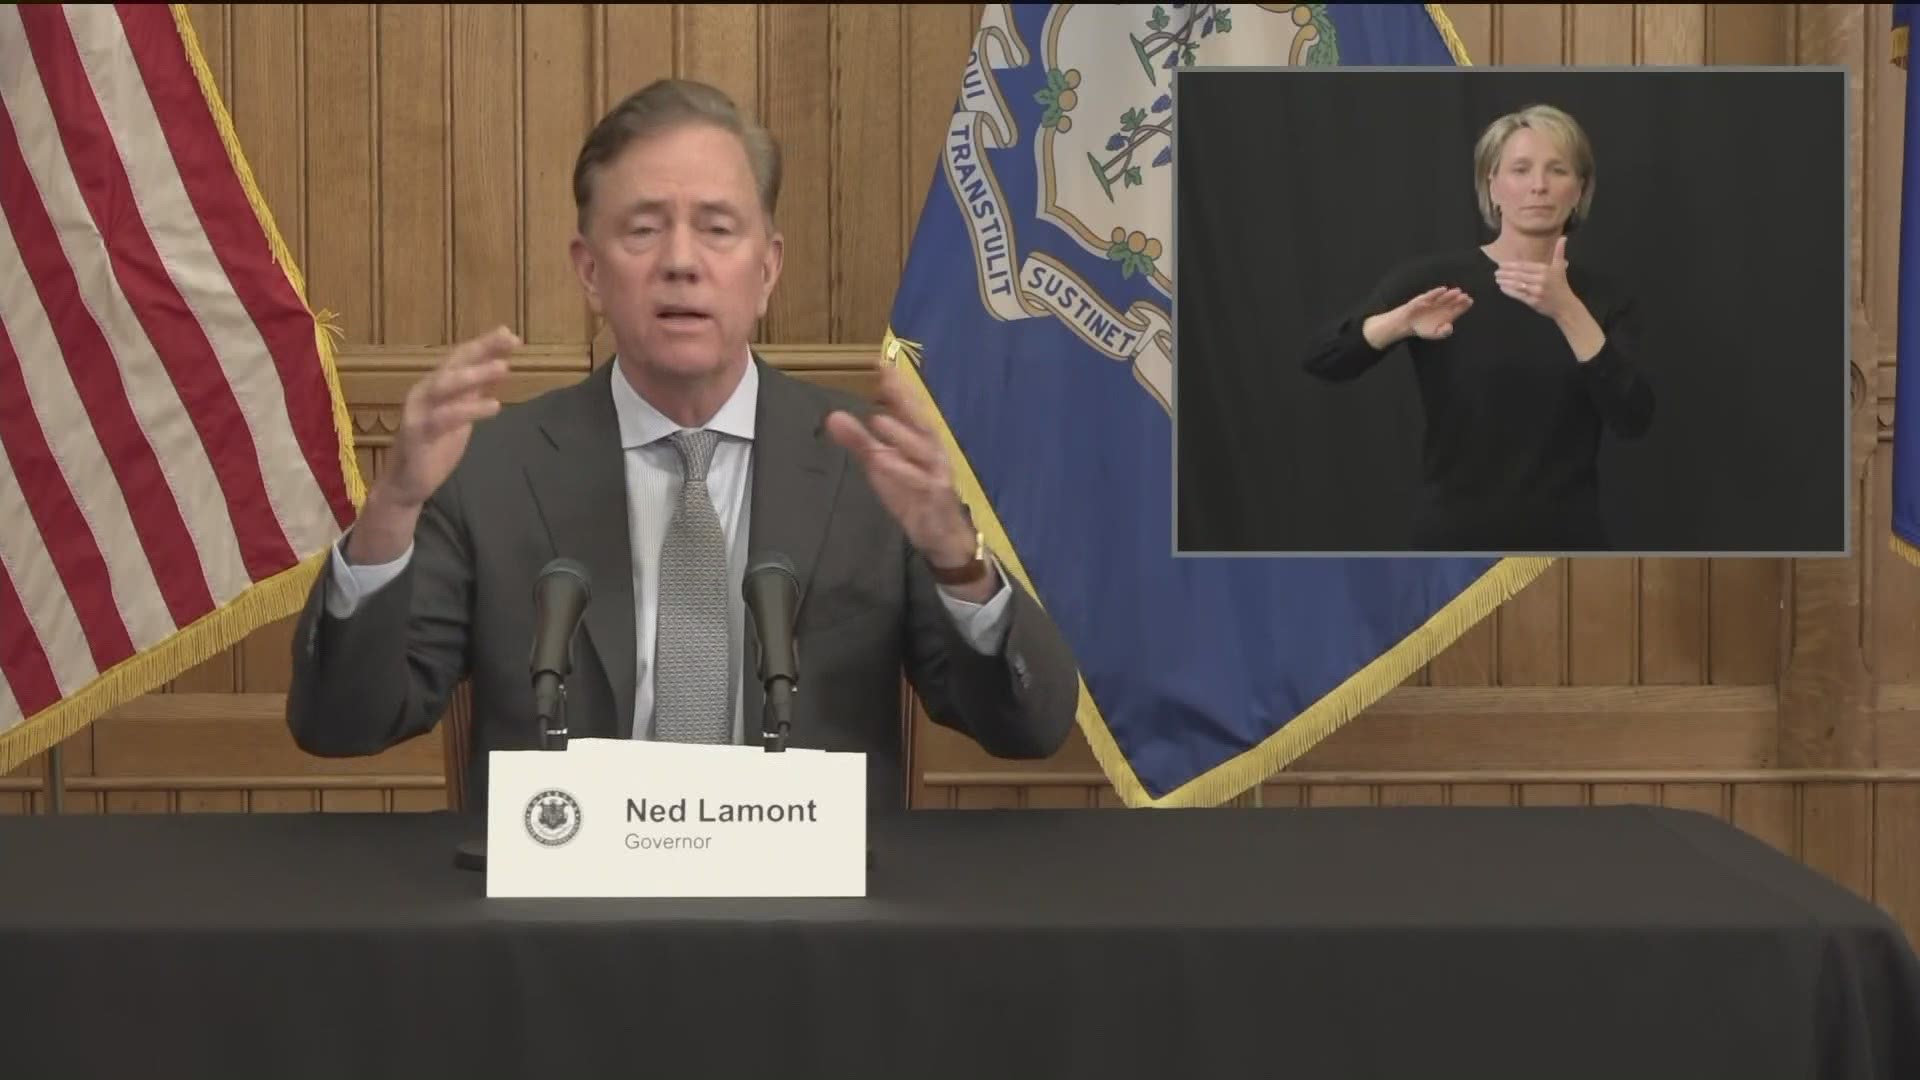 "Before we had said 50, but use your common sense. I'm going to be strict on that. No more than five people in a social gathering," said Gov. Lamont